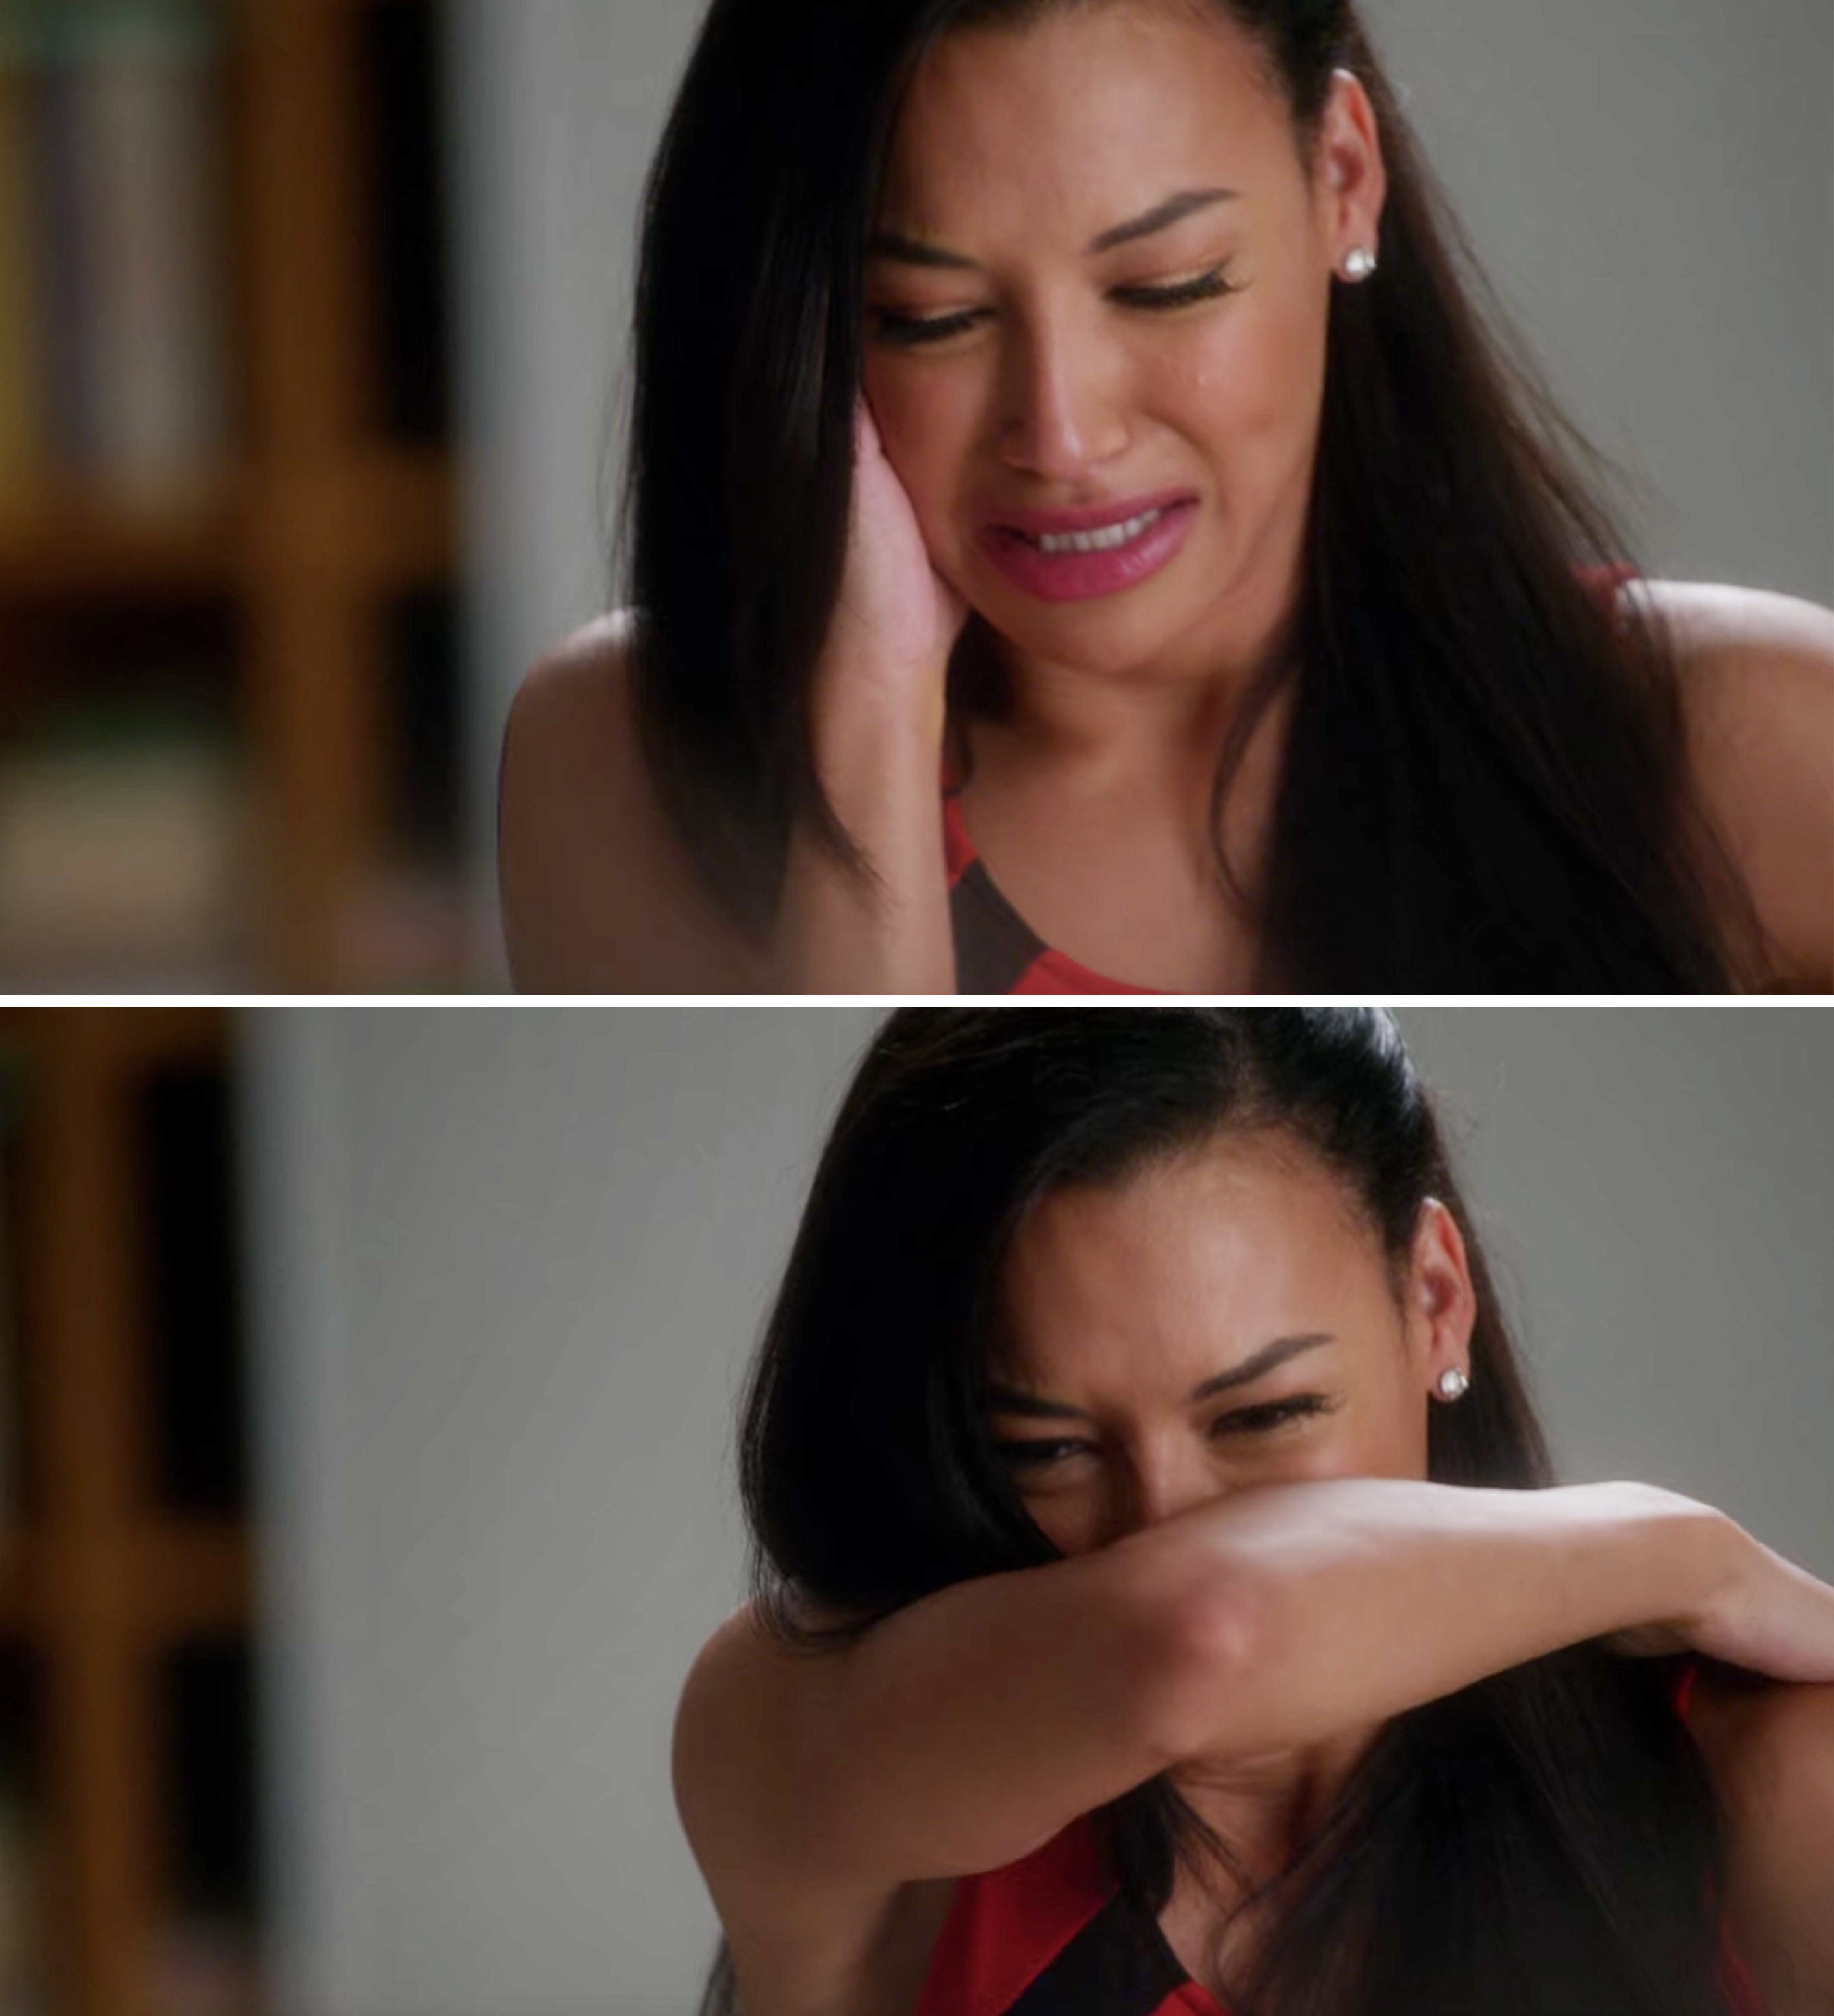 Naya crying and covering her mouth with the crook of her arm